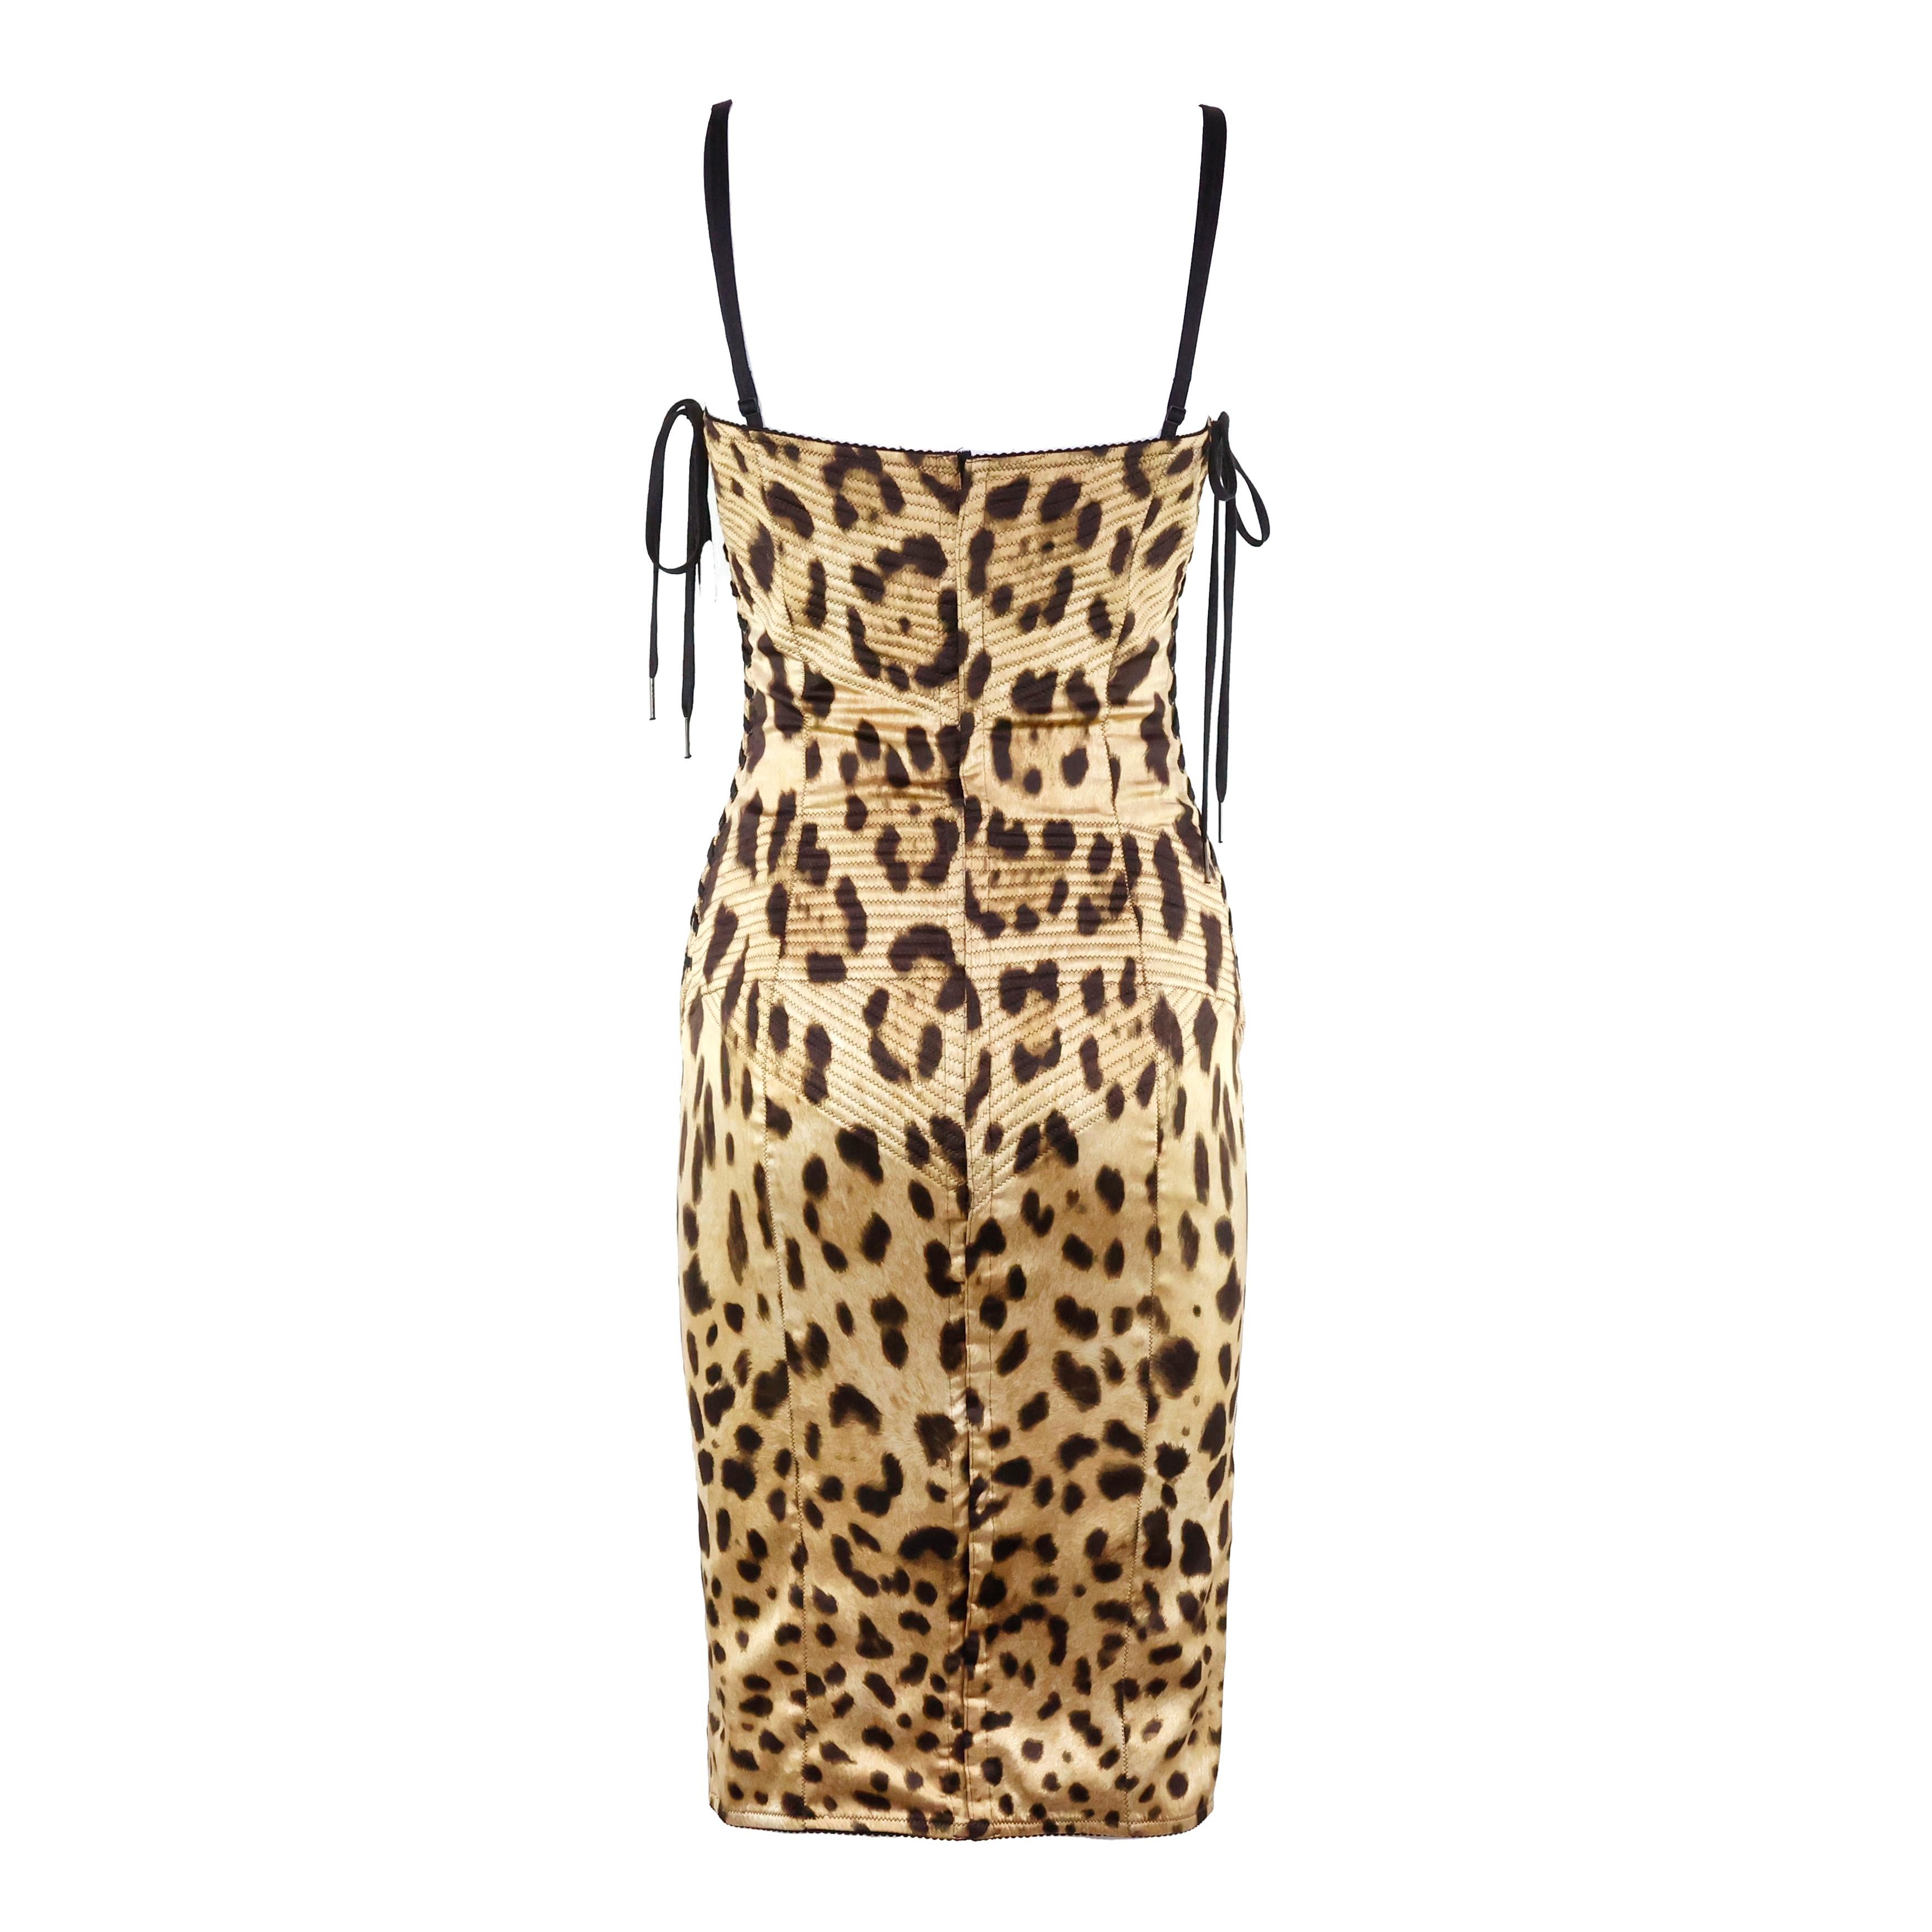 Dolce & Gabbana leopard print corset bustier dress in silk. Size 42 IT.

Condition:
Excellent.

Packing/accessories:
Cover, hanger.